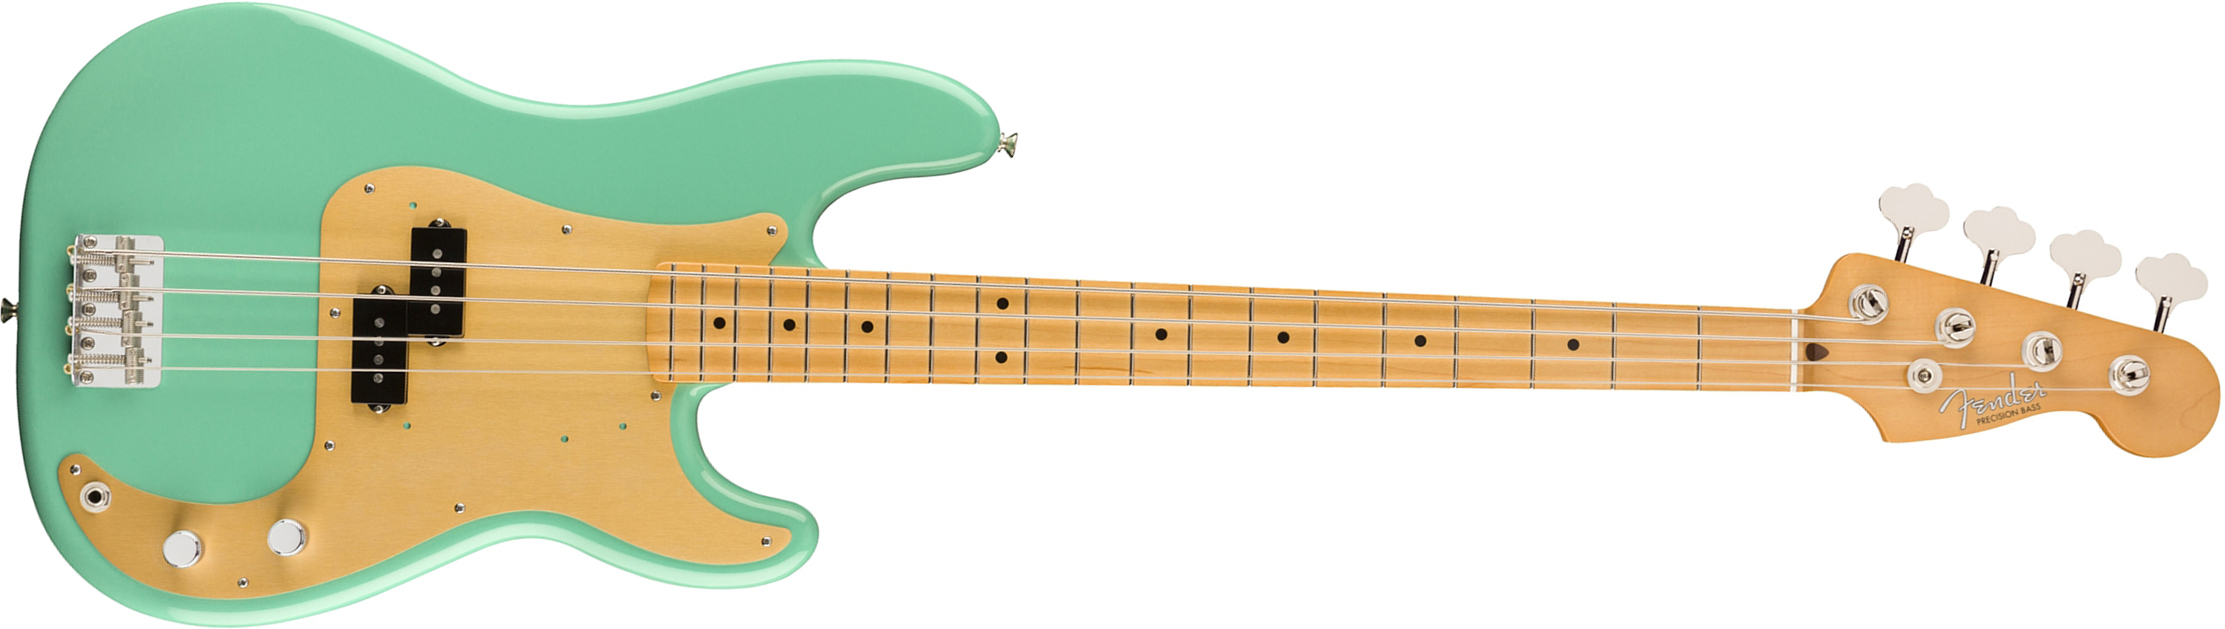 Fender Precision Bass 50s Vintera Vintage Mex Mn - Seafoam Green - Solid body electric bass - Main picture